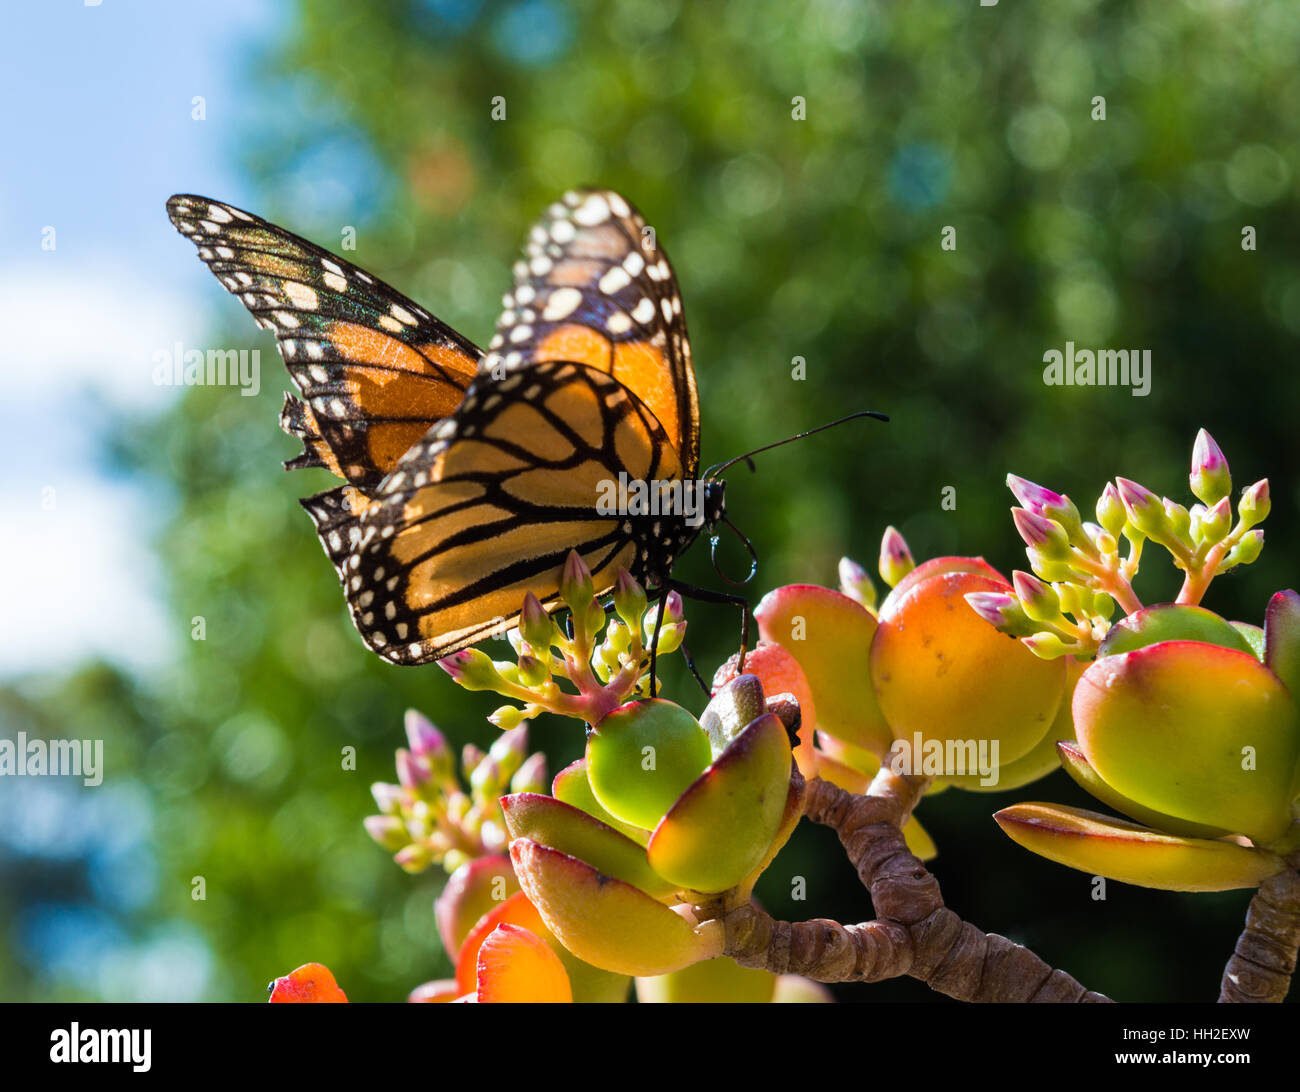 Monach Butterfly Sitting on a Jade Plant Stock Photo